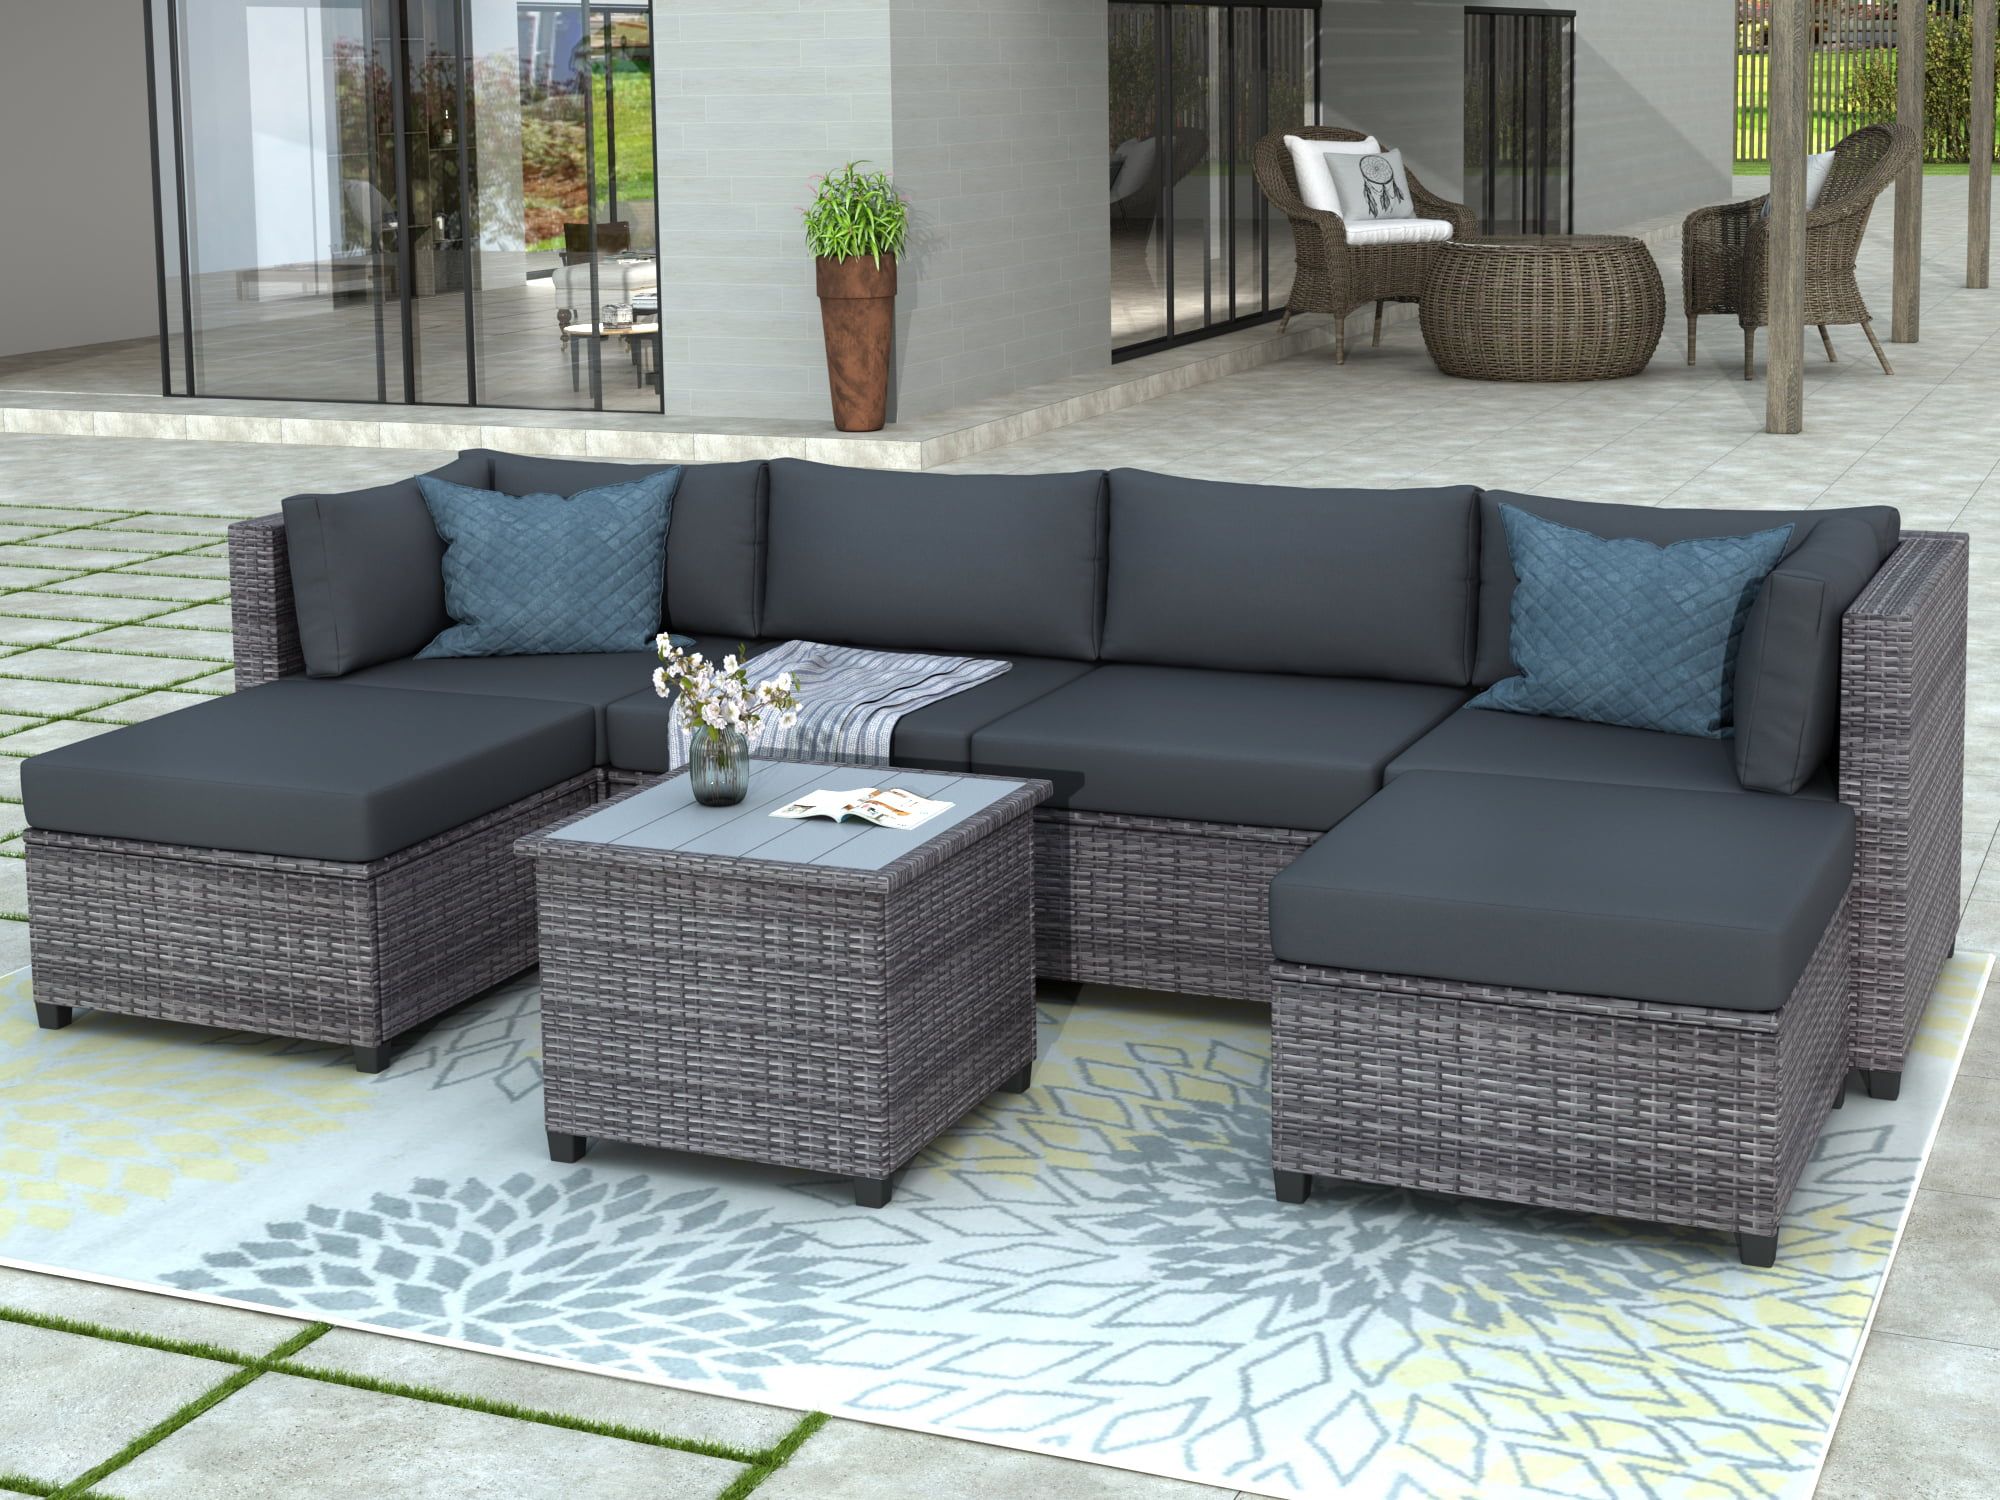 7 Piece Patio Sectional Sofa Set With 4 Rattan Wicker Chairs, 2 Ottoman, Coffee  Table, All Weather Outdoor Conversation Set With Gray Cushions For  Backyard, Porch, Garden, Poolside, L5018 – Walmart With Regard To Outdoor Rattan Sectional Sofas With Coffee Table (View 4 of 15)